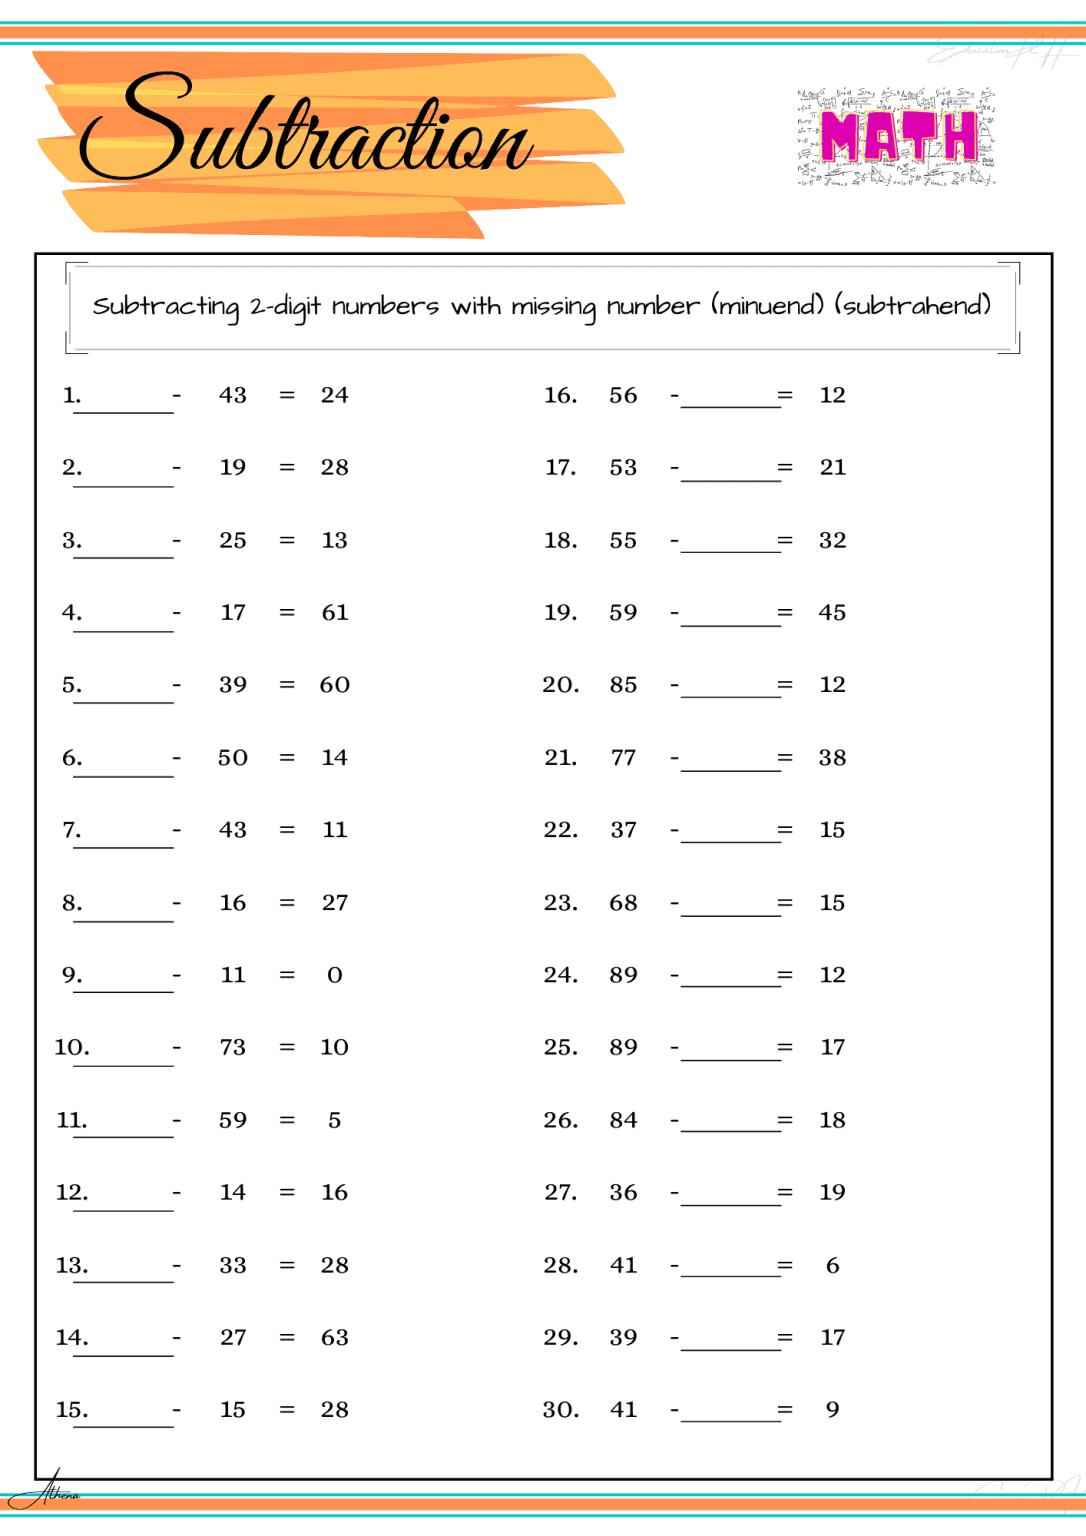 second-grade-subtraction-math-worksheets-edumonitor-free-printable-number-subtraction-1-10